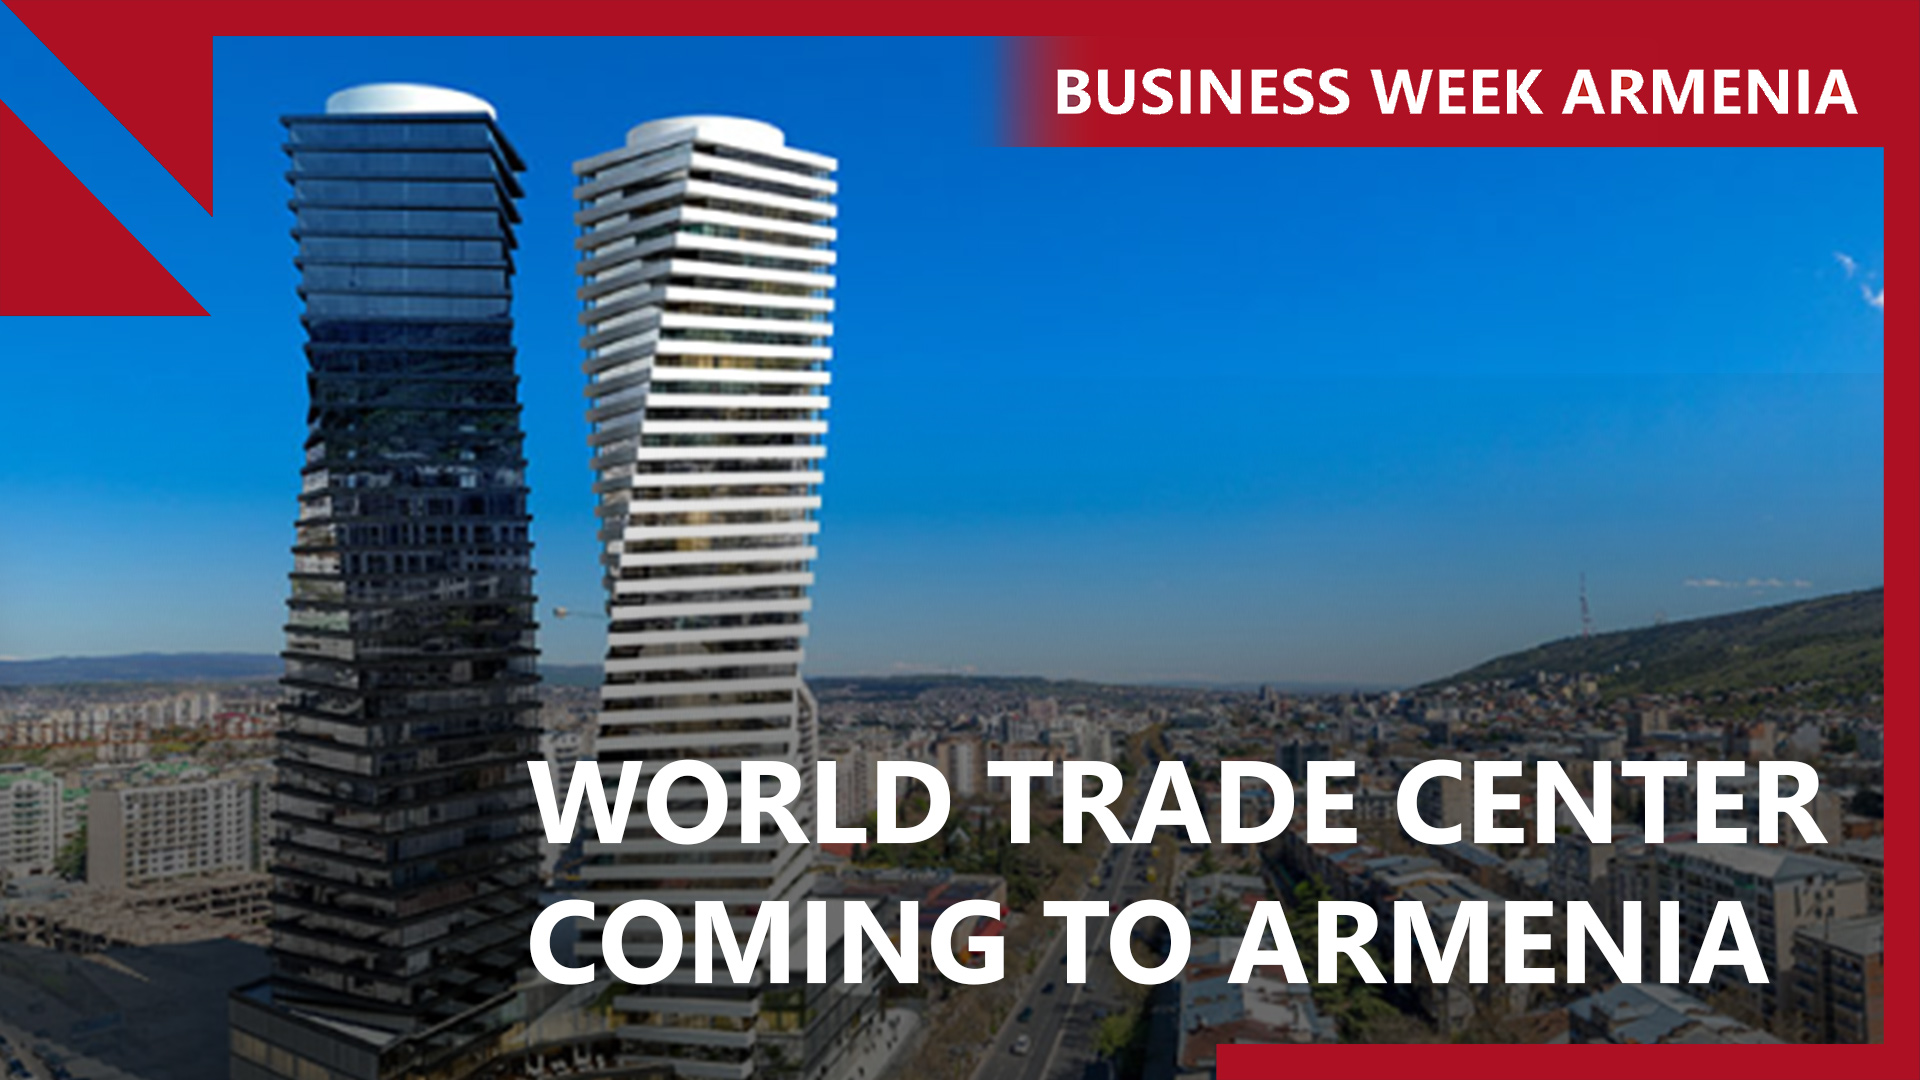 Armenia greenlights World Trade Center project: THIS WEEK IN BUSINESS